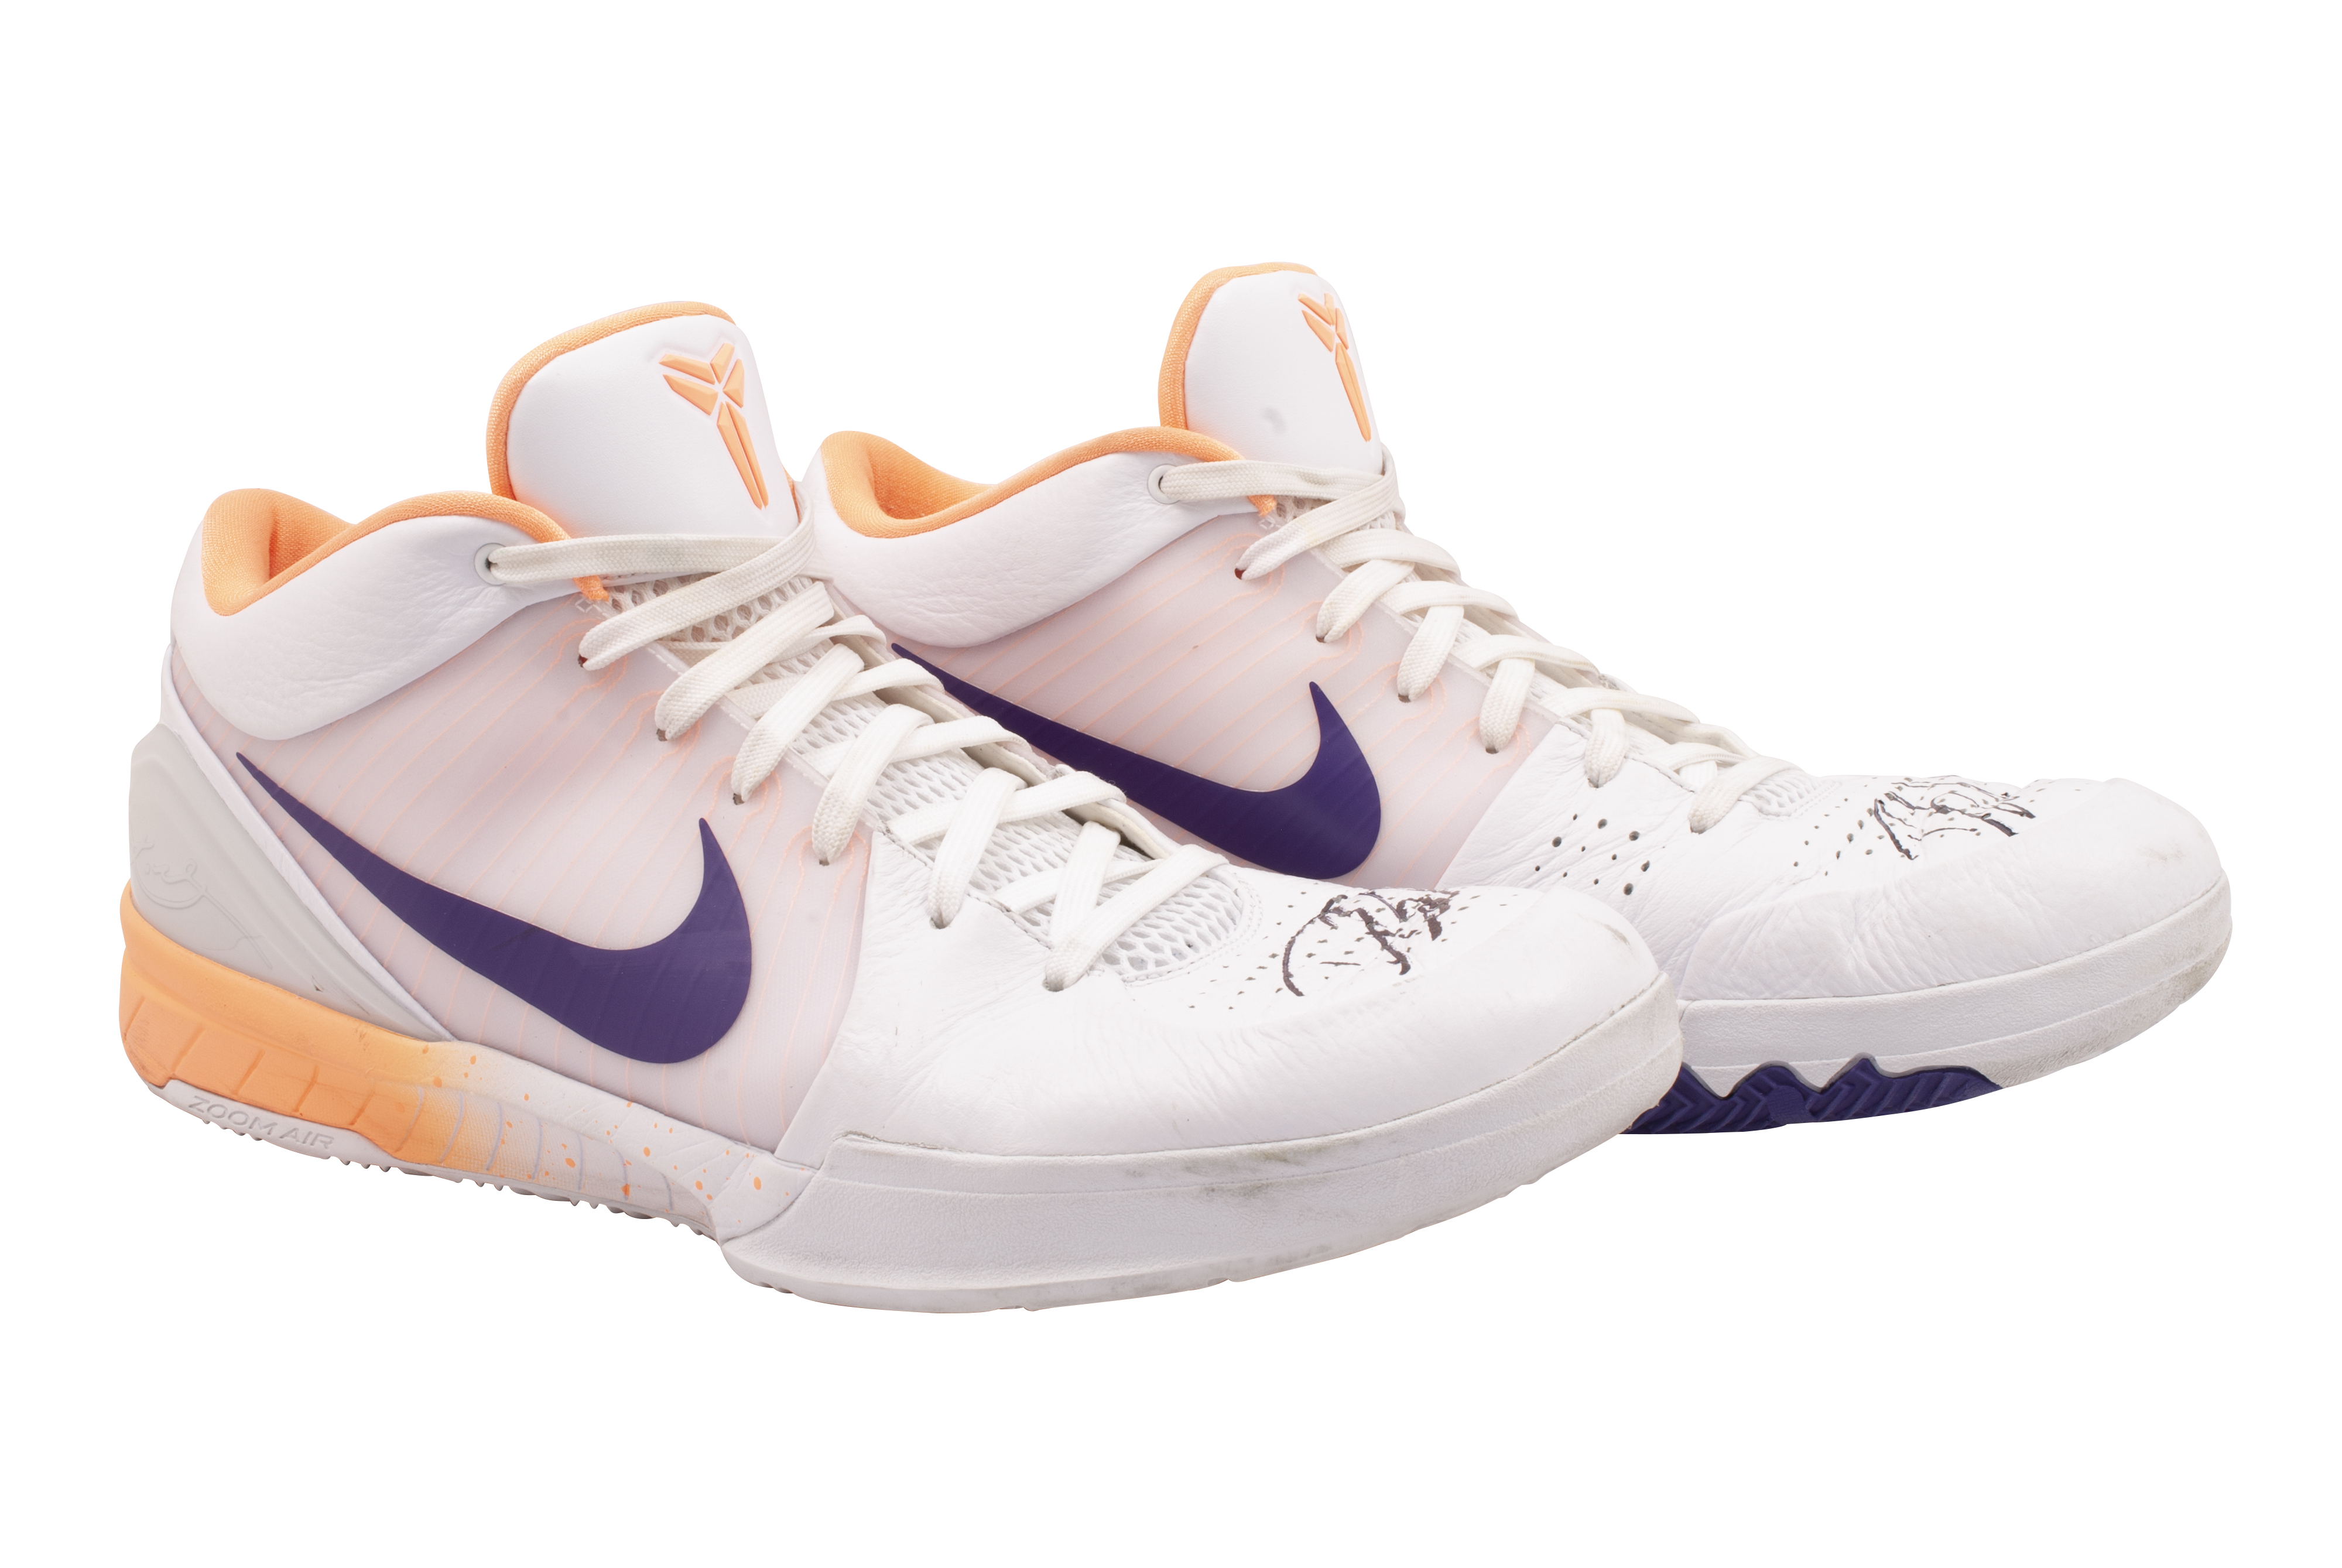 Devin Booker's Signature Shoe With Nike Is Coming Soon - The Ringer